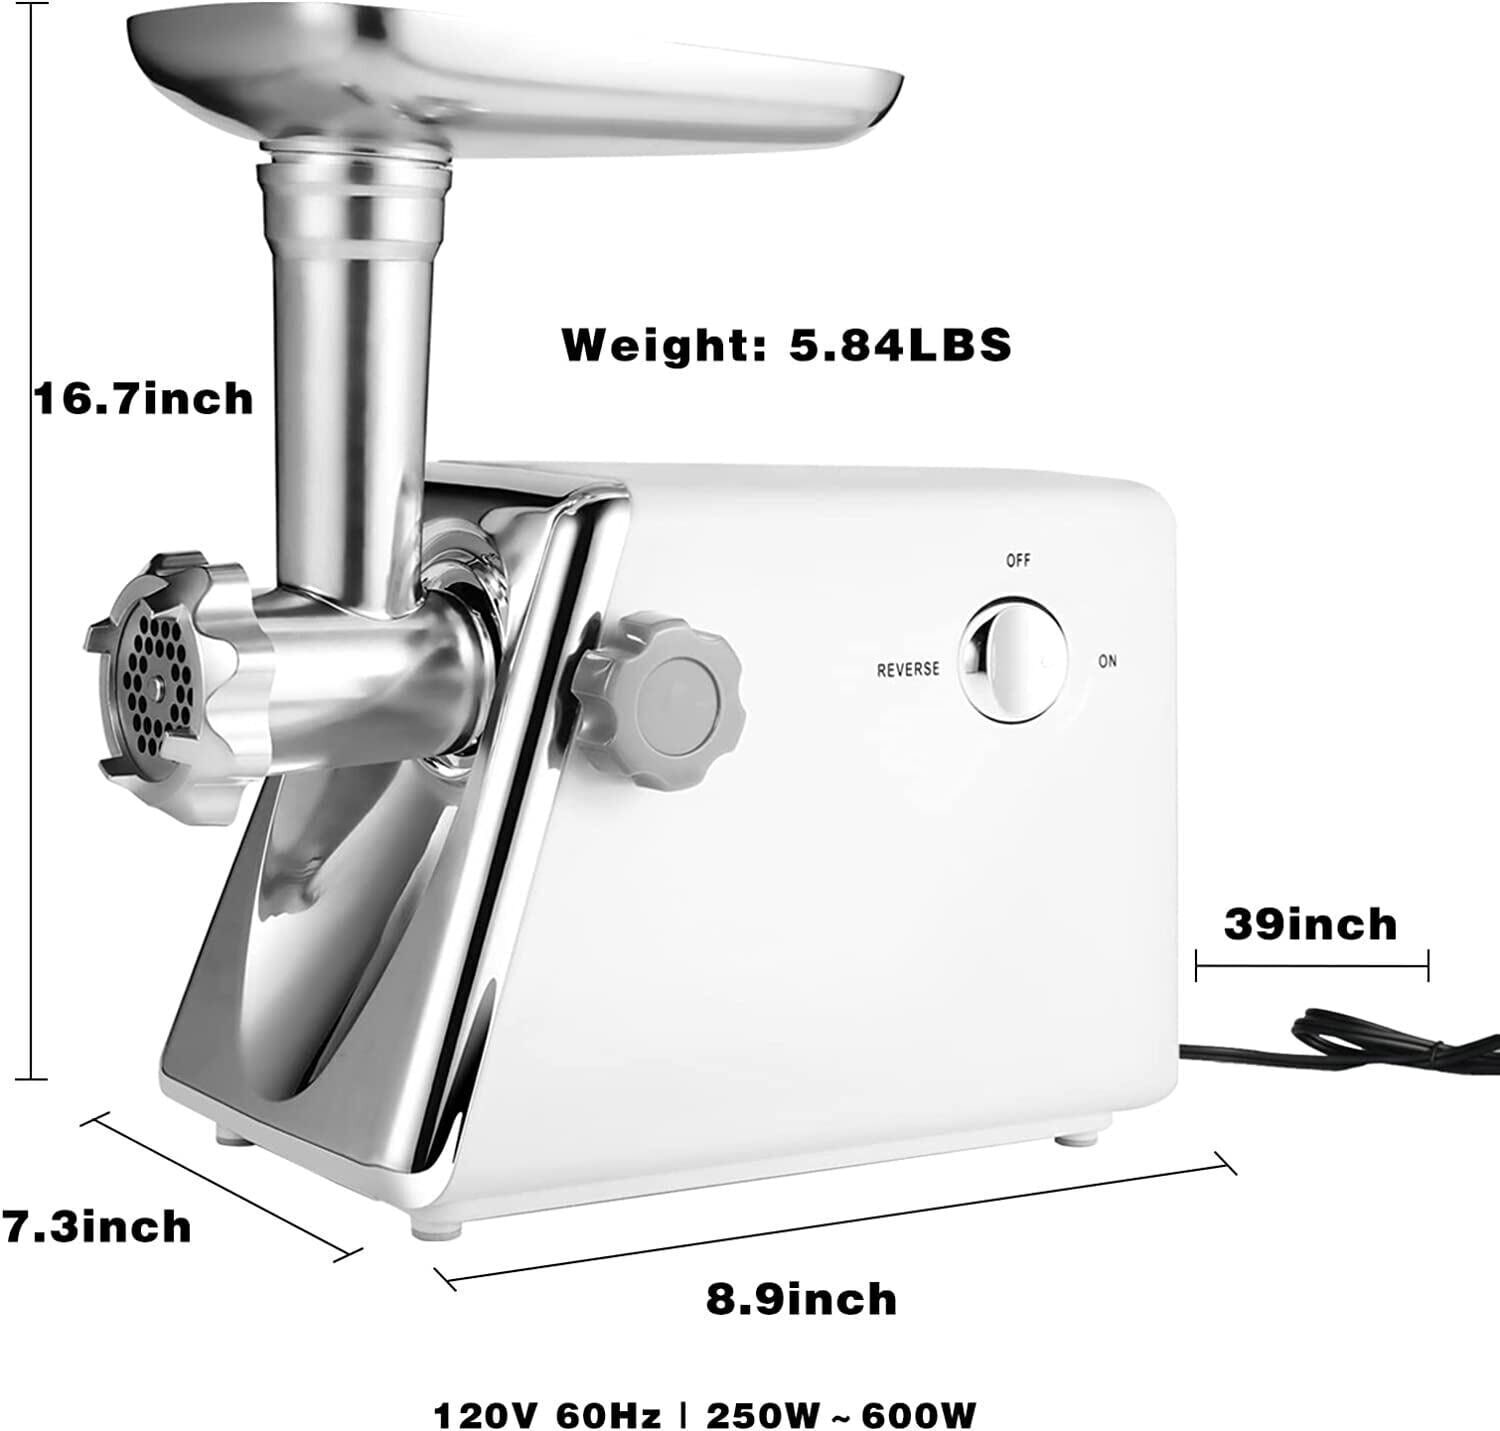 VEVOR 1100-Watt Silver Electric Meat Grinder 550 lbs./Hour Commercial